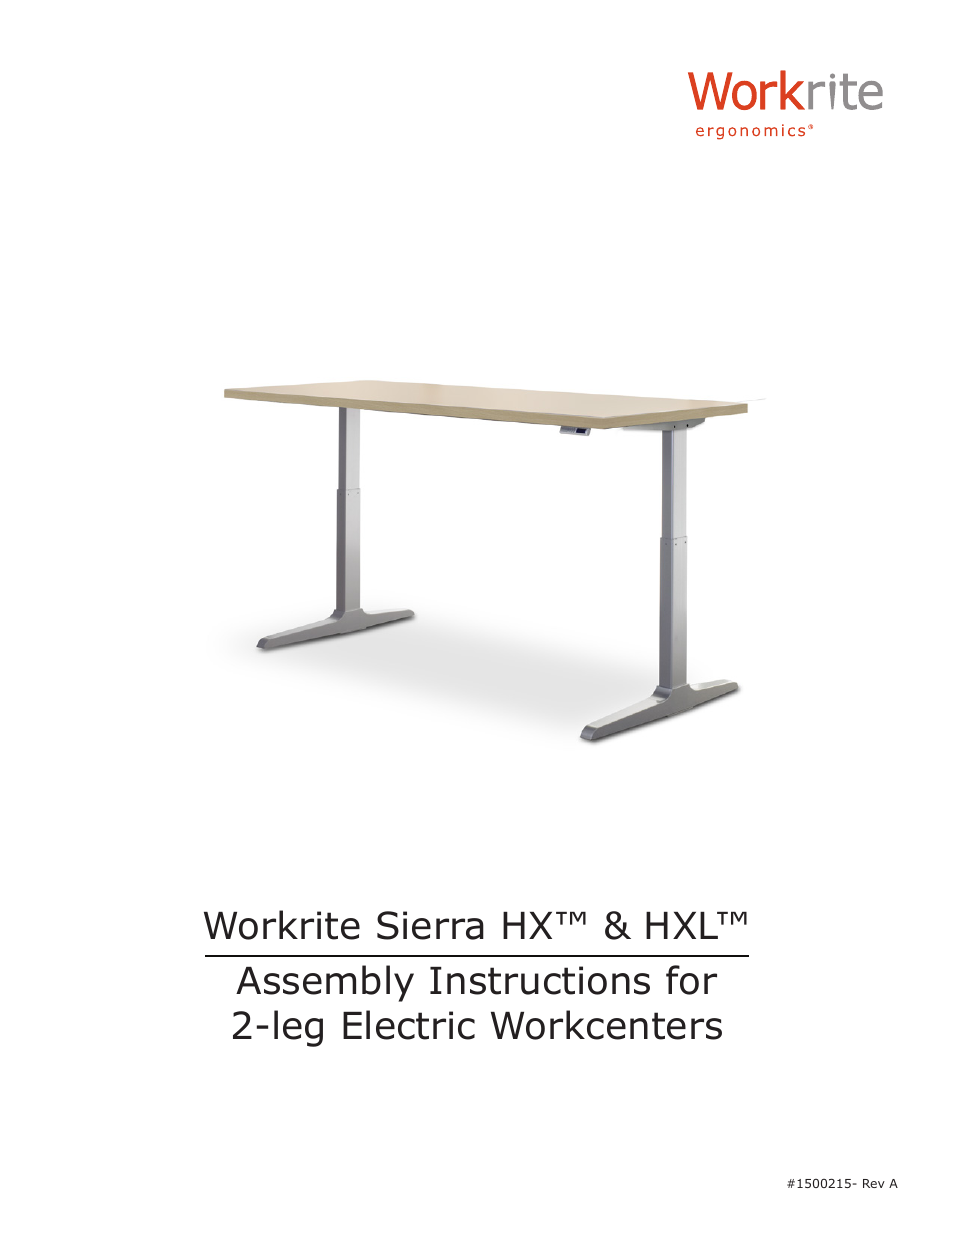 Sierra HX Electric Assembly Instructions for 2-leg Electric Workcenters